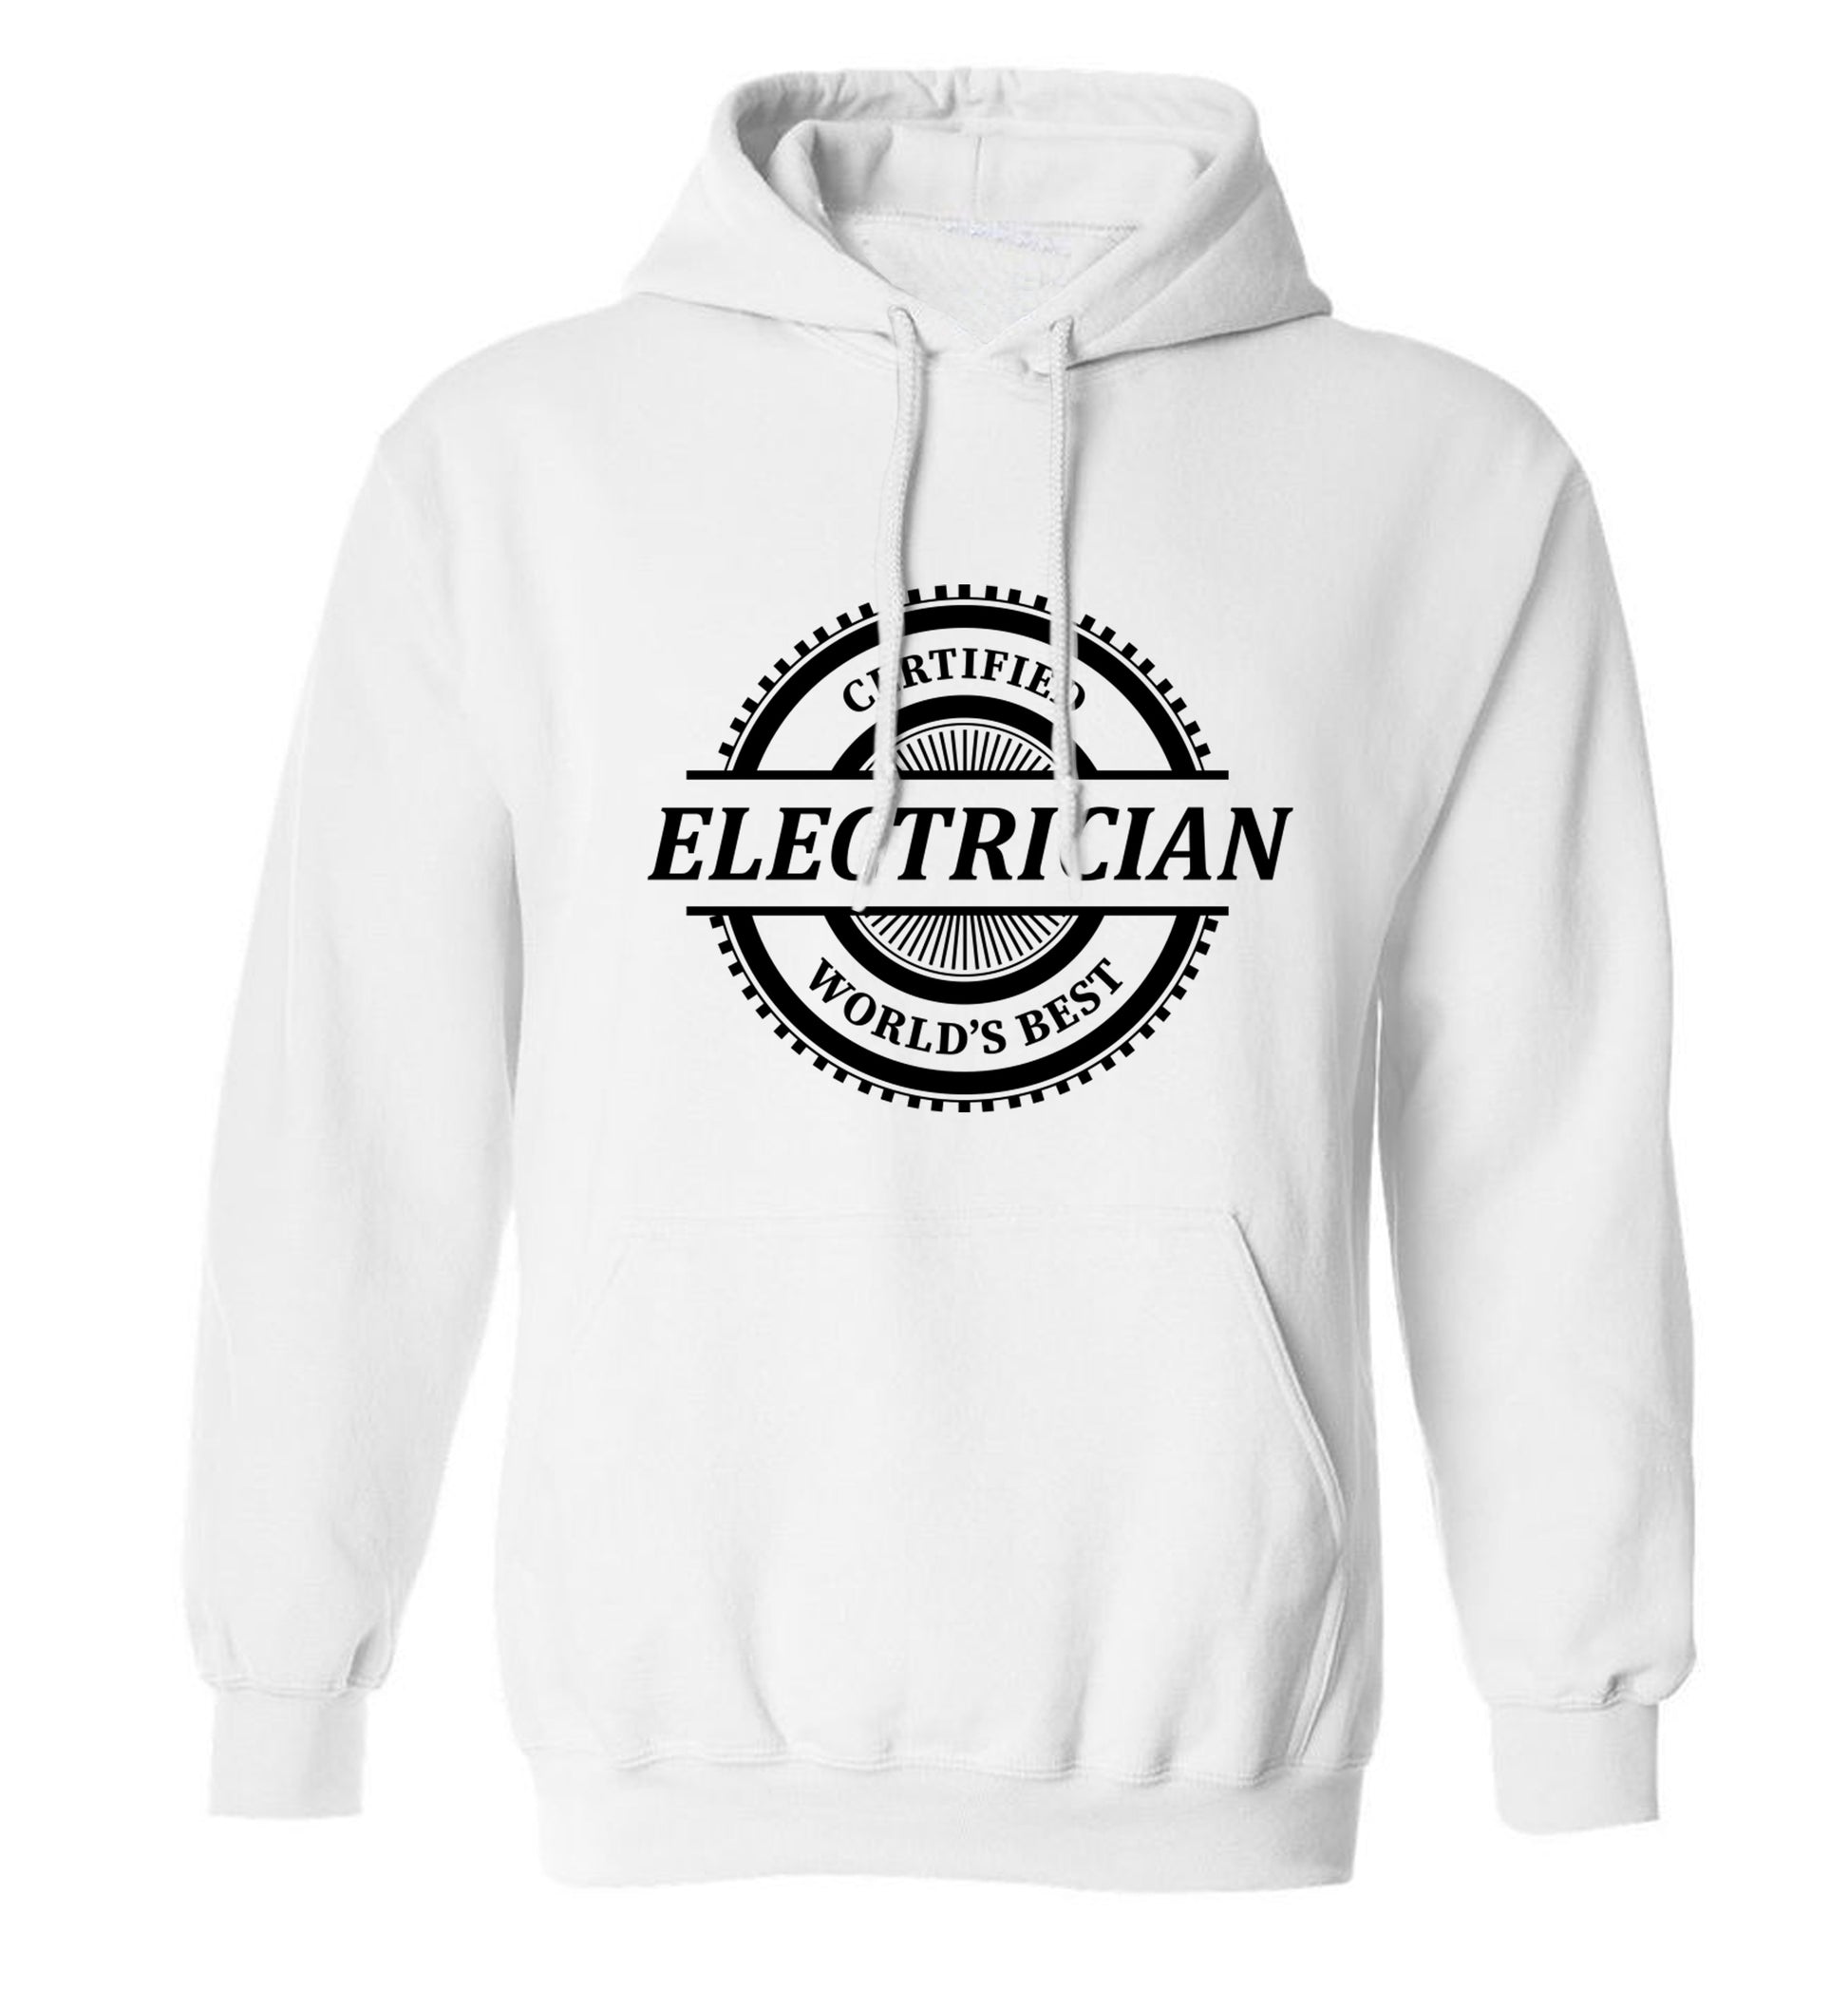 Worlds greatest electrician adults unisex white hoodie 2XL